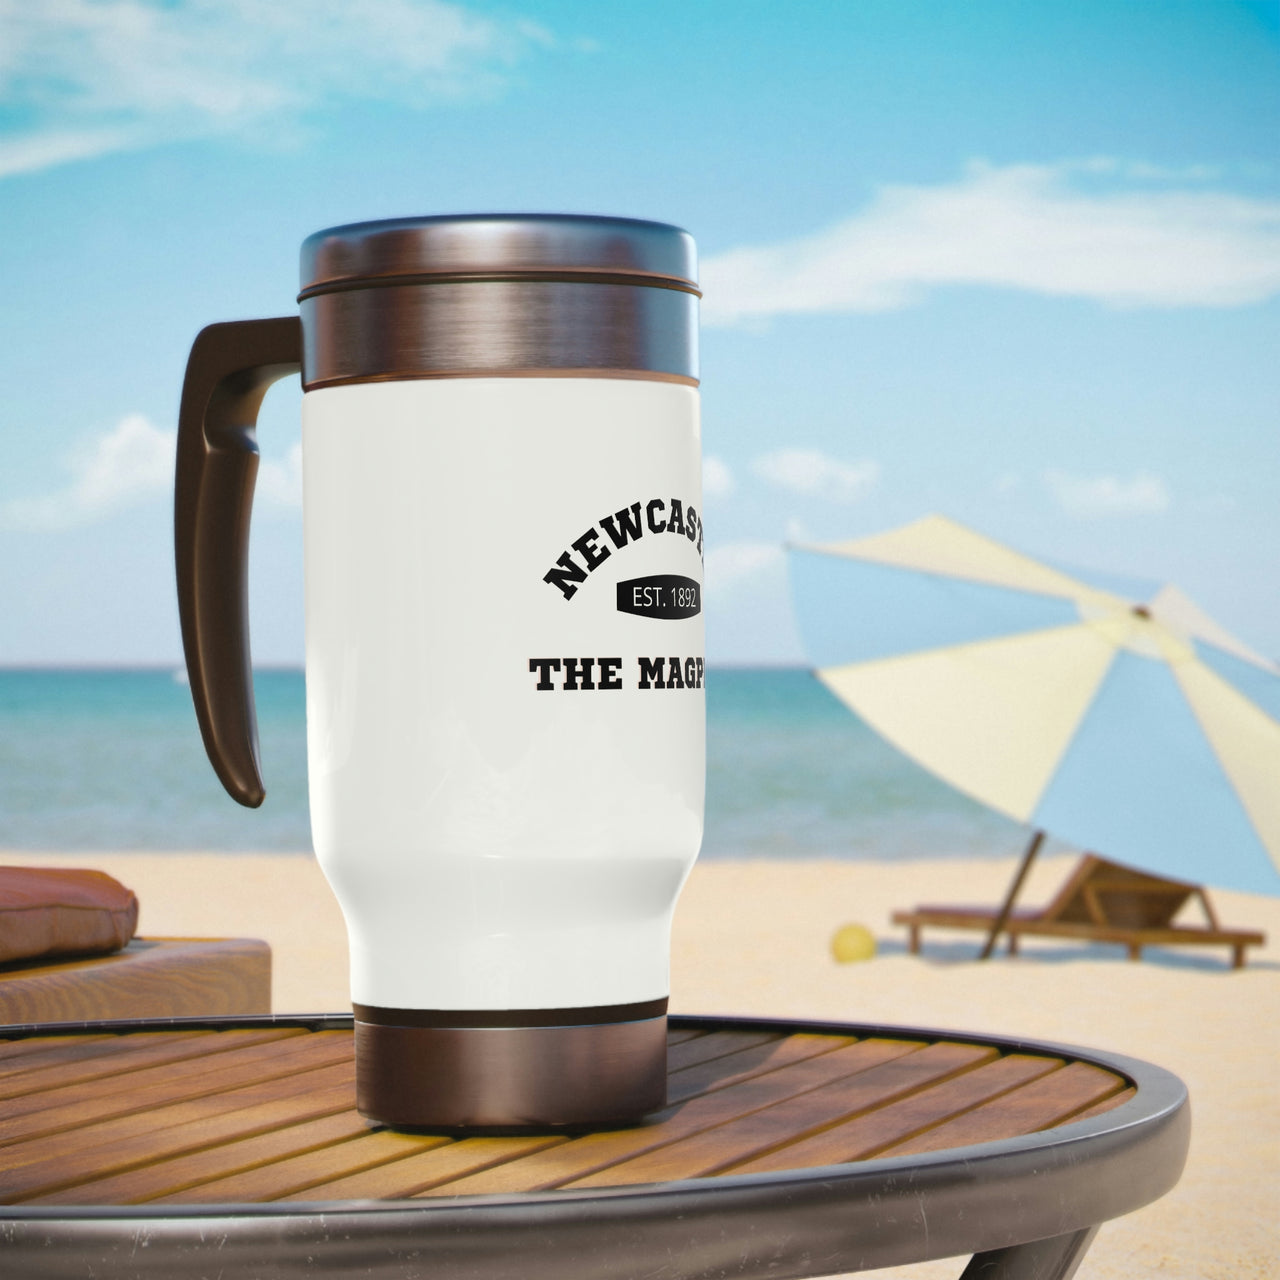 Newcastle Stainless Steel Travel Mug with Handle, 14oz